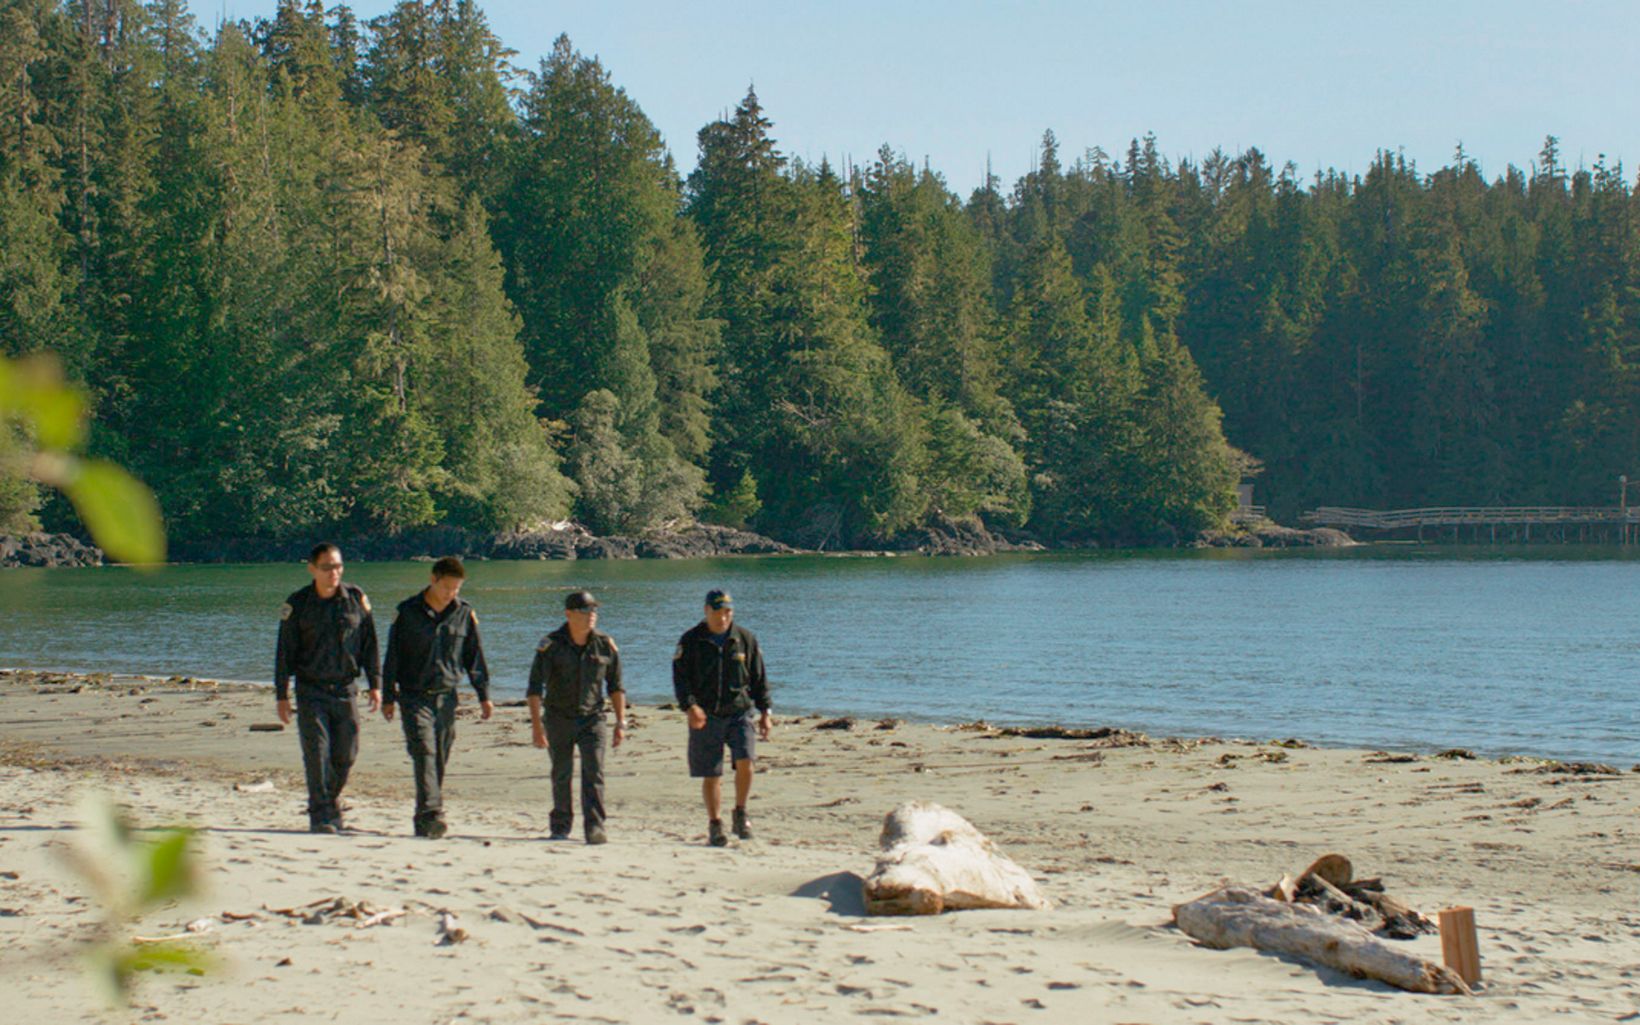 Across Canada, Indigenous guardian programs are essential for stewardship of land and water. Ahousaht Watchmen walk across beach in Canada.